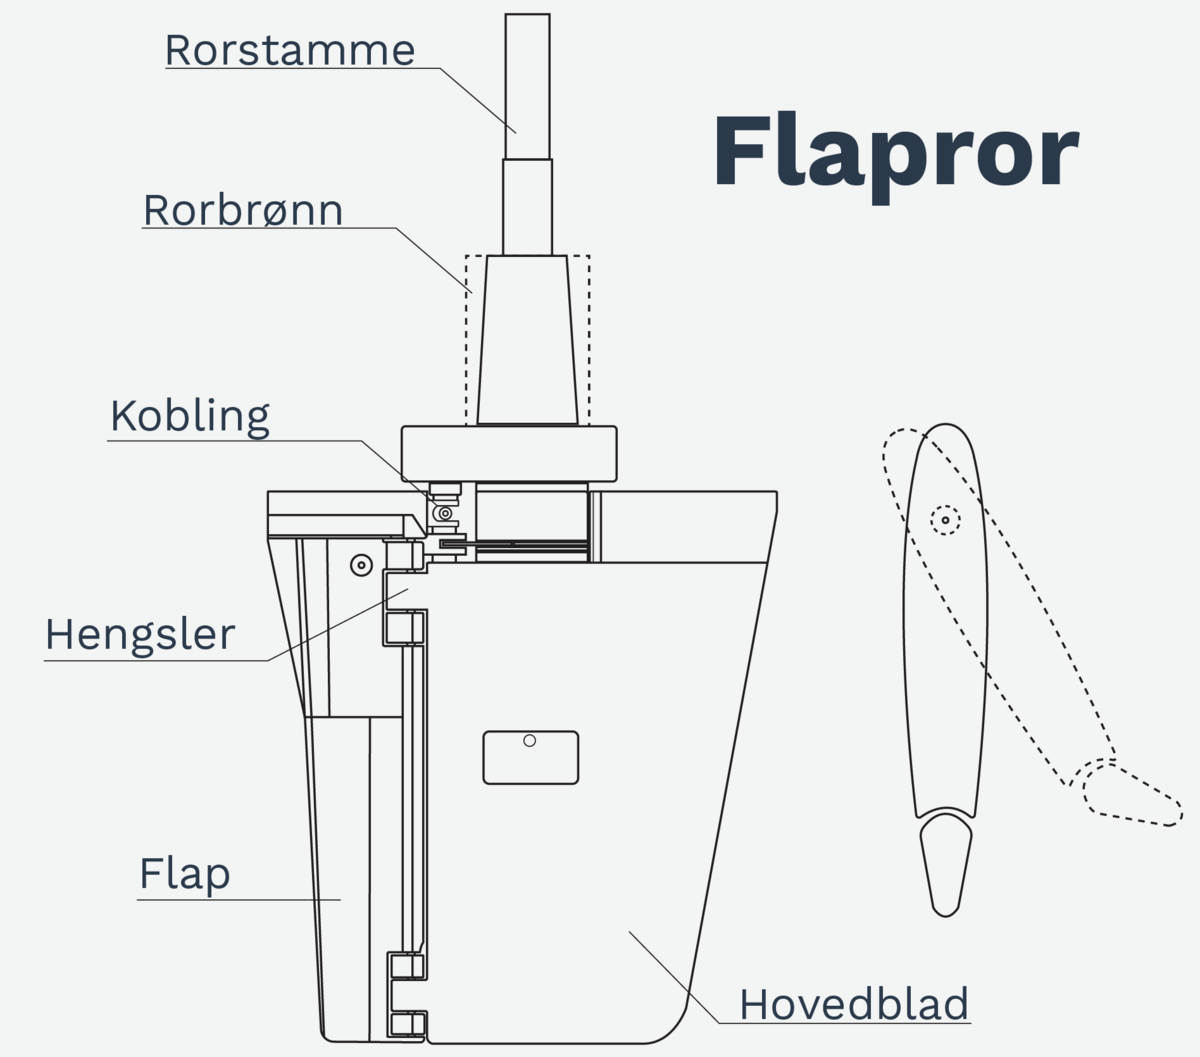 Flapror